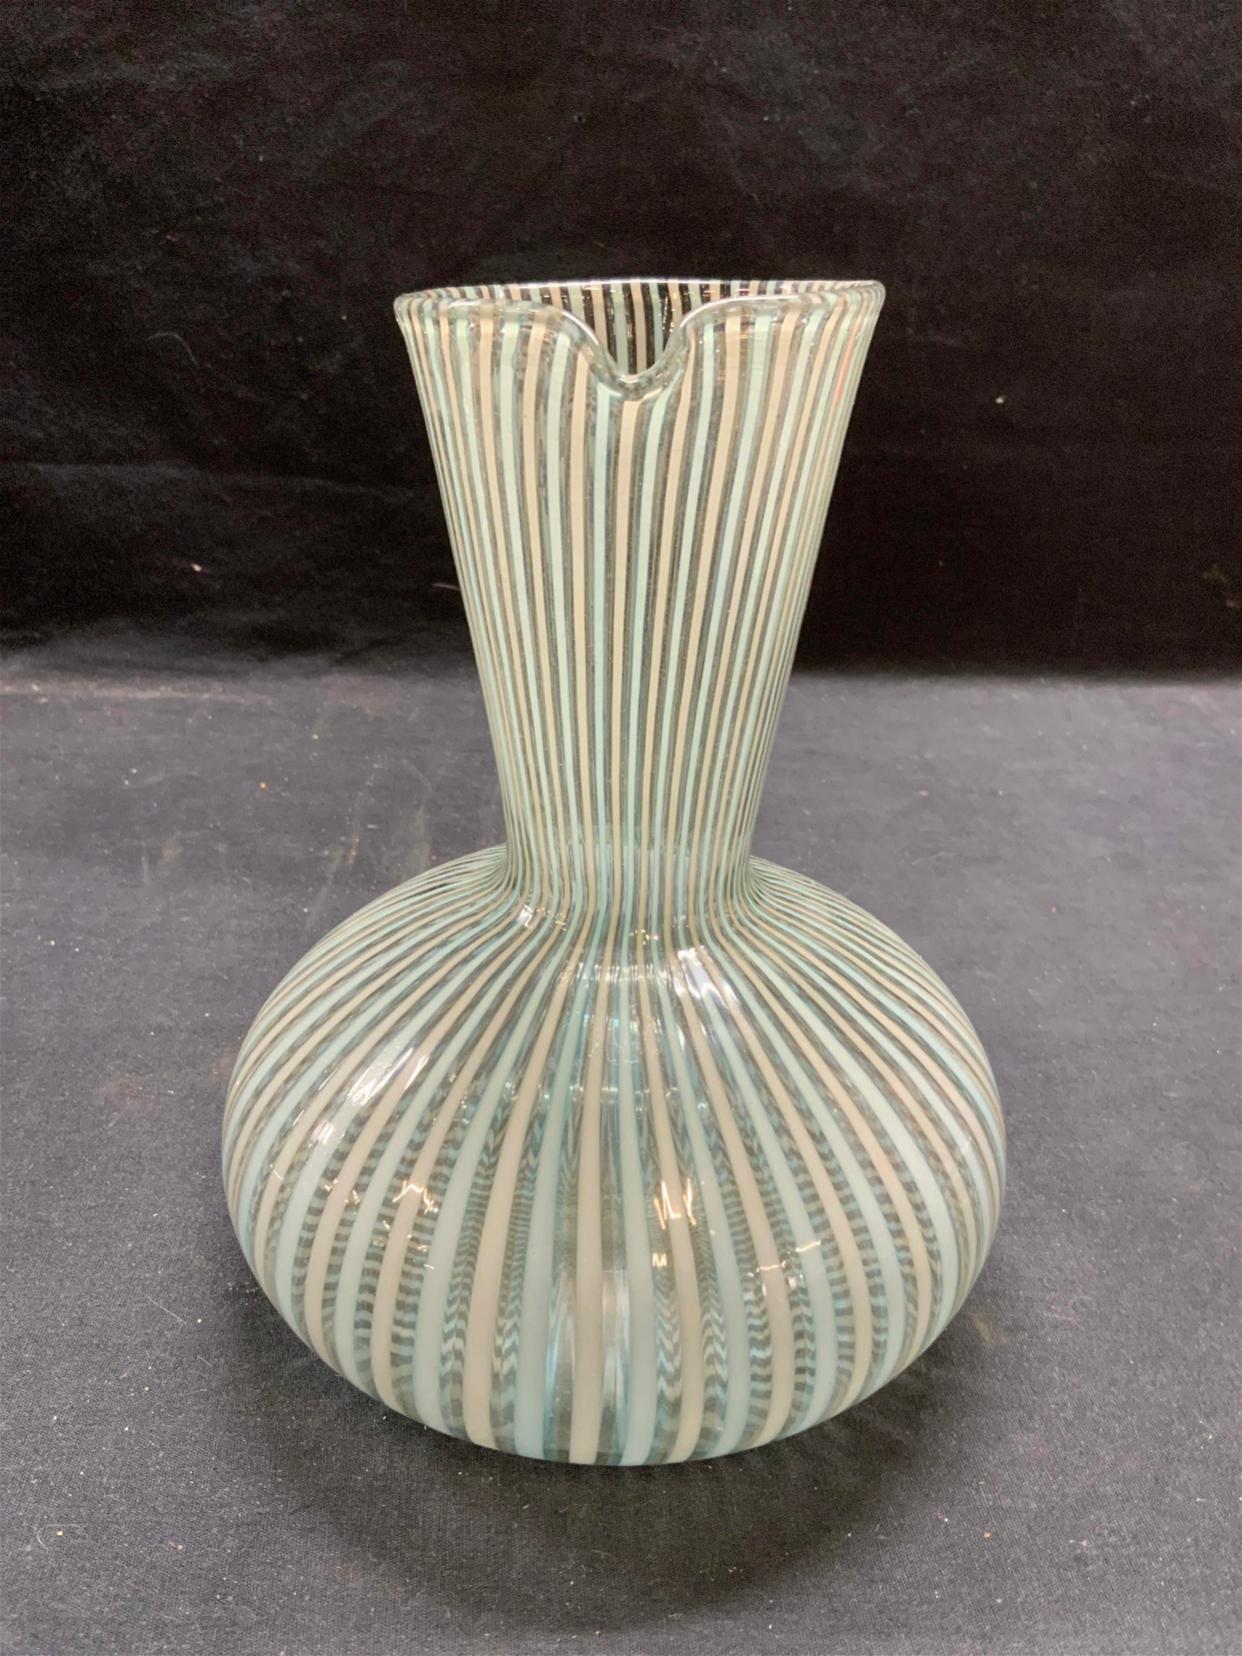 Small, striped glass carafe by Gio Ponti for Venini. 
This is an ‘A Canne’ or caned glass carafe or pitcher. It was produced in Italy at the Venini glass factory. In 1921 Venini and Cappellin opened a glass factory called Vetri Soffiati Muranesi